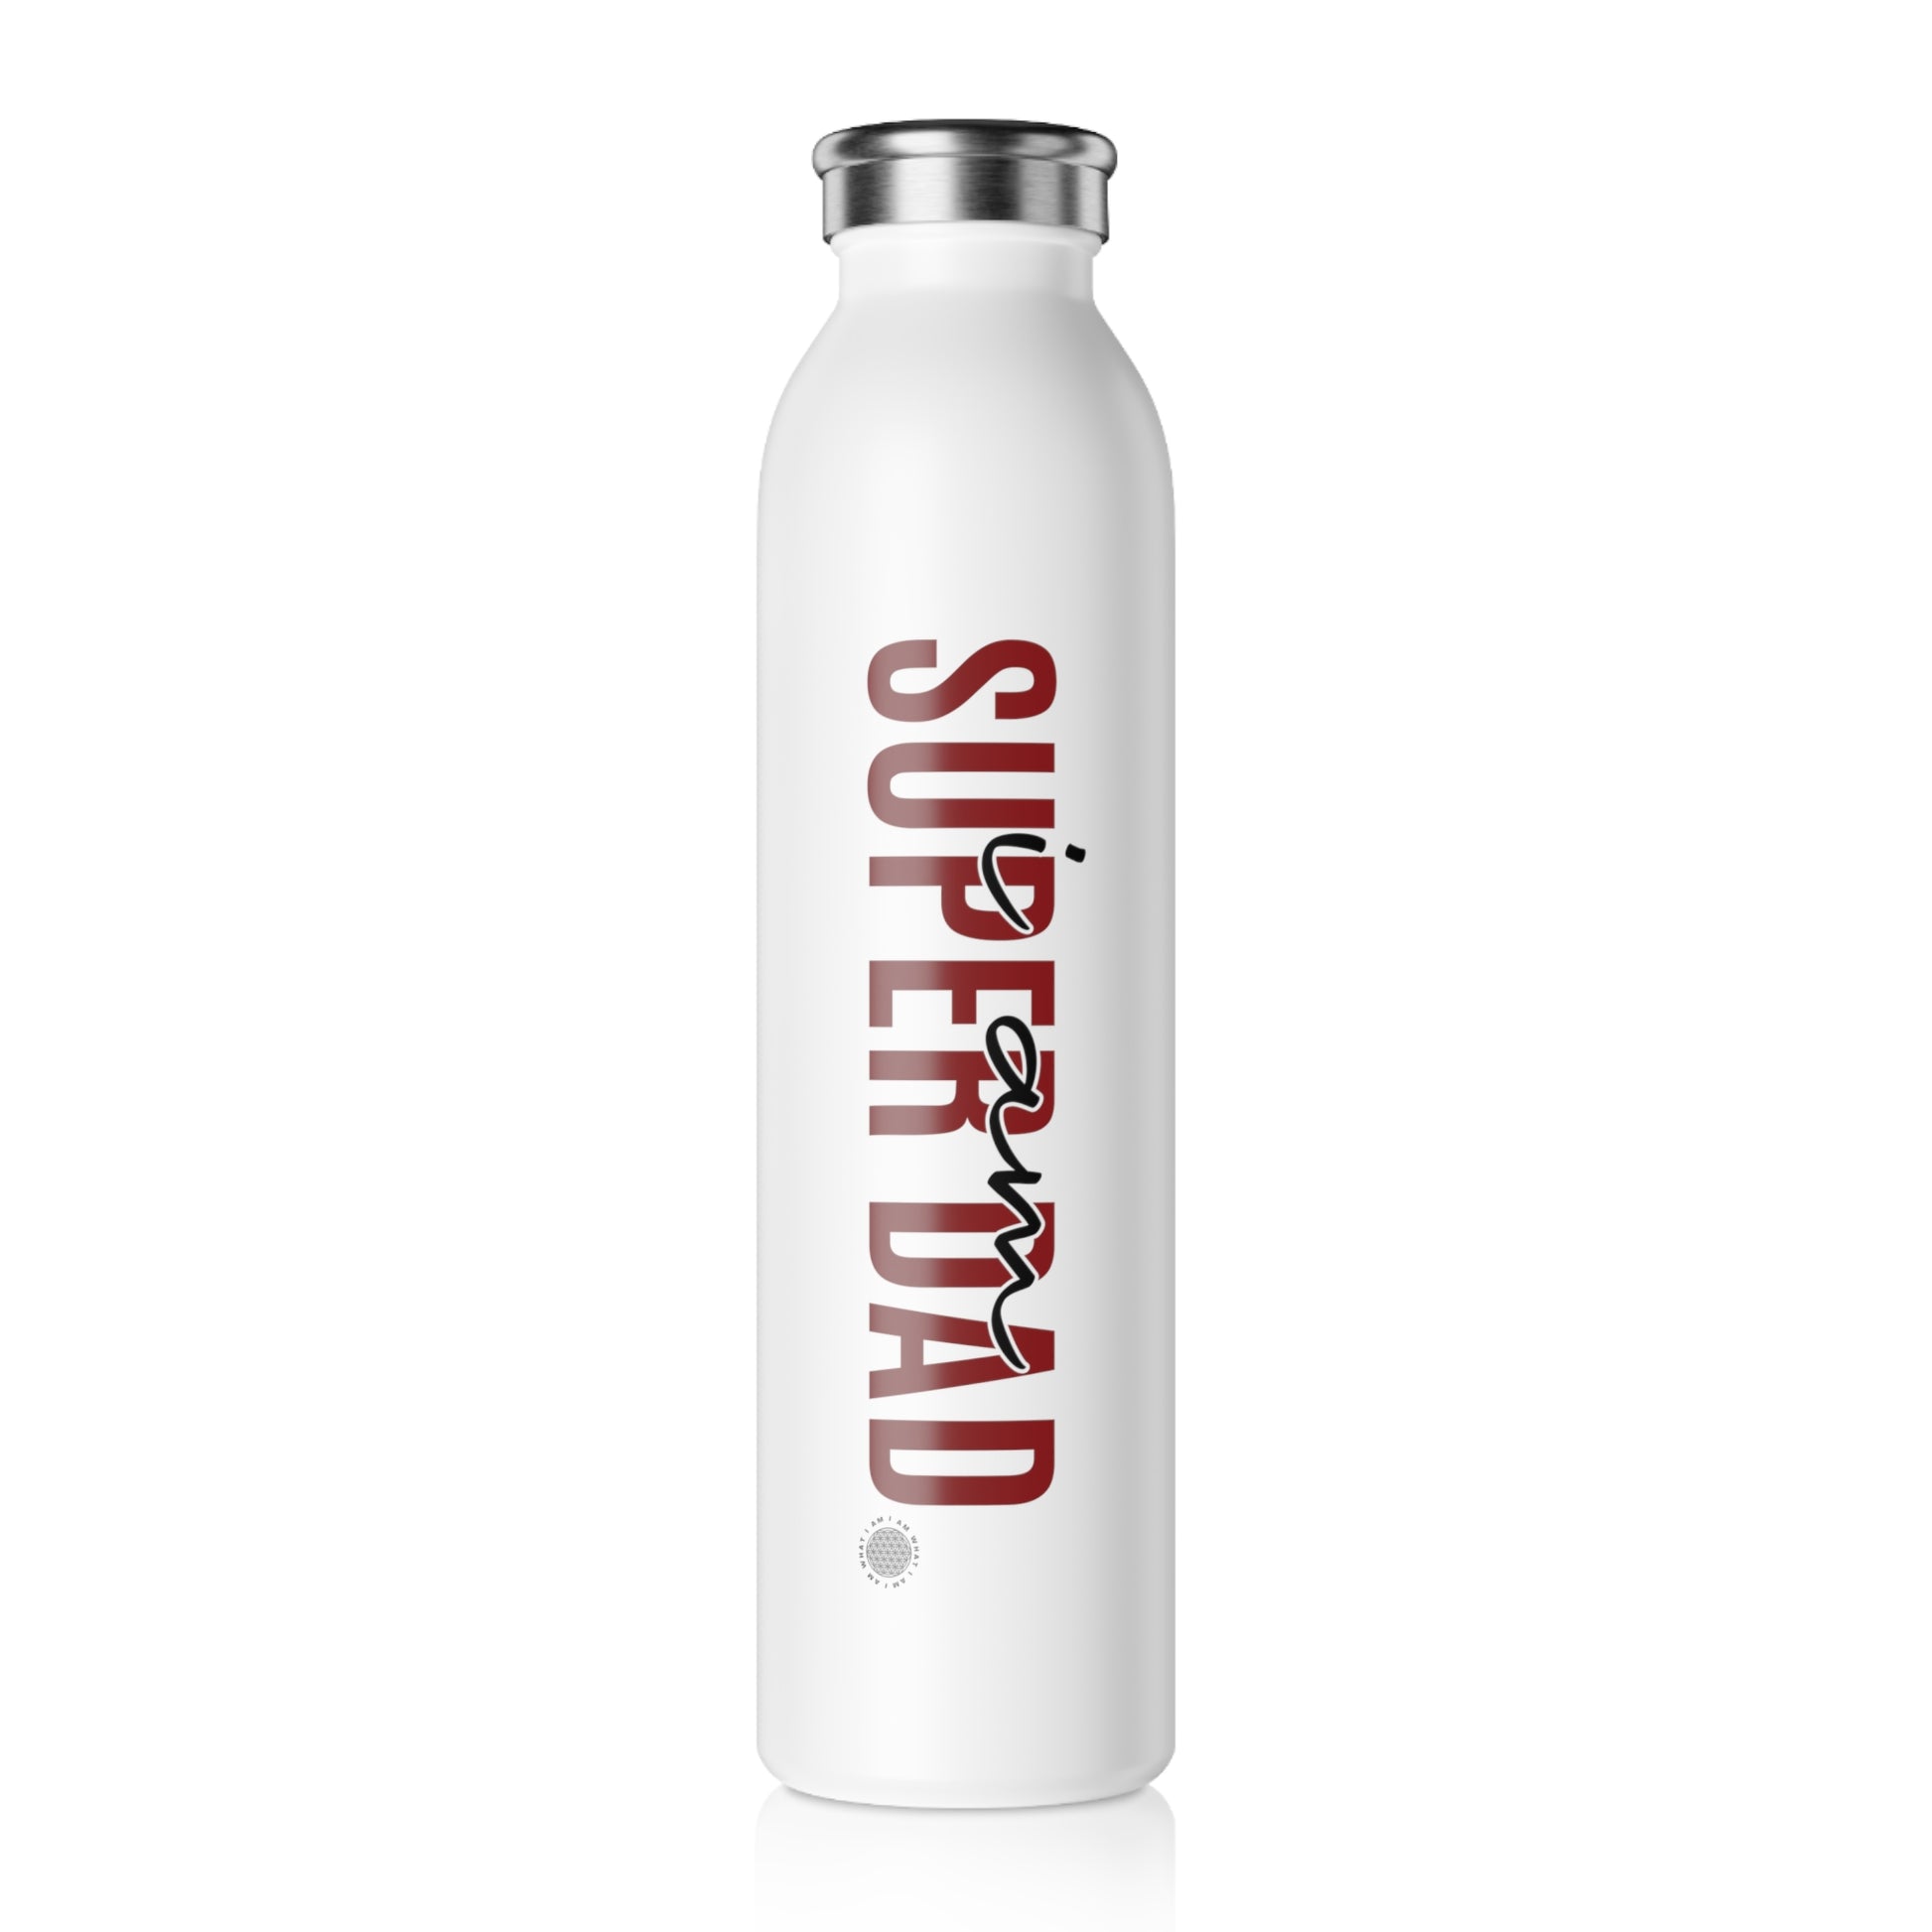 Our 'I Am Super Dad' affirmation water bottle is perfect for your loving father who does absolutely everything for you and always on the go. Show him you are grateful.